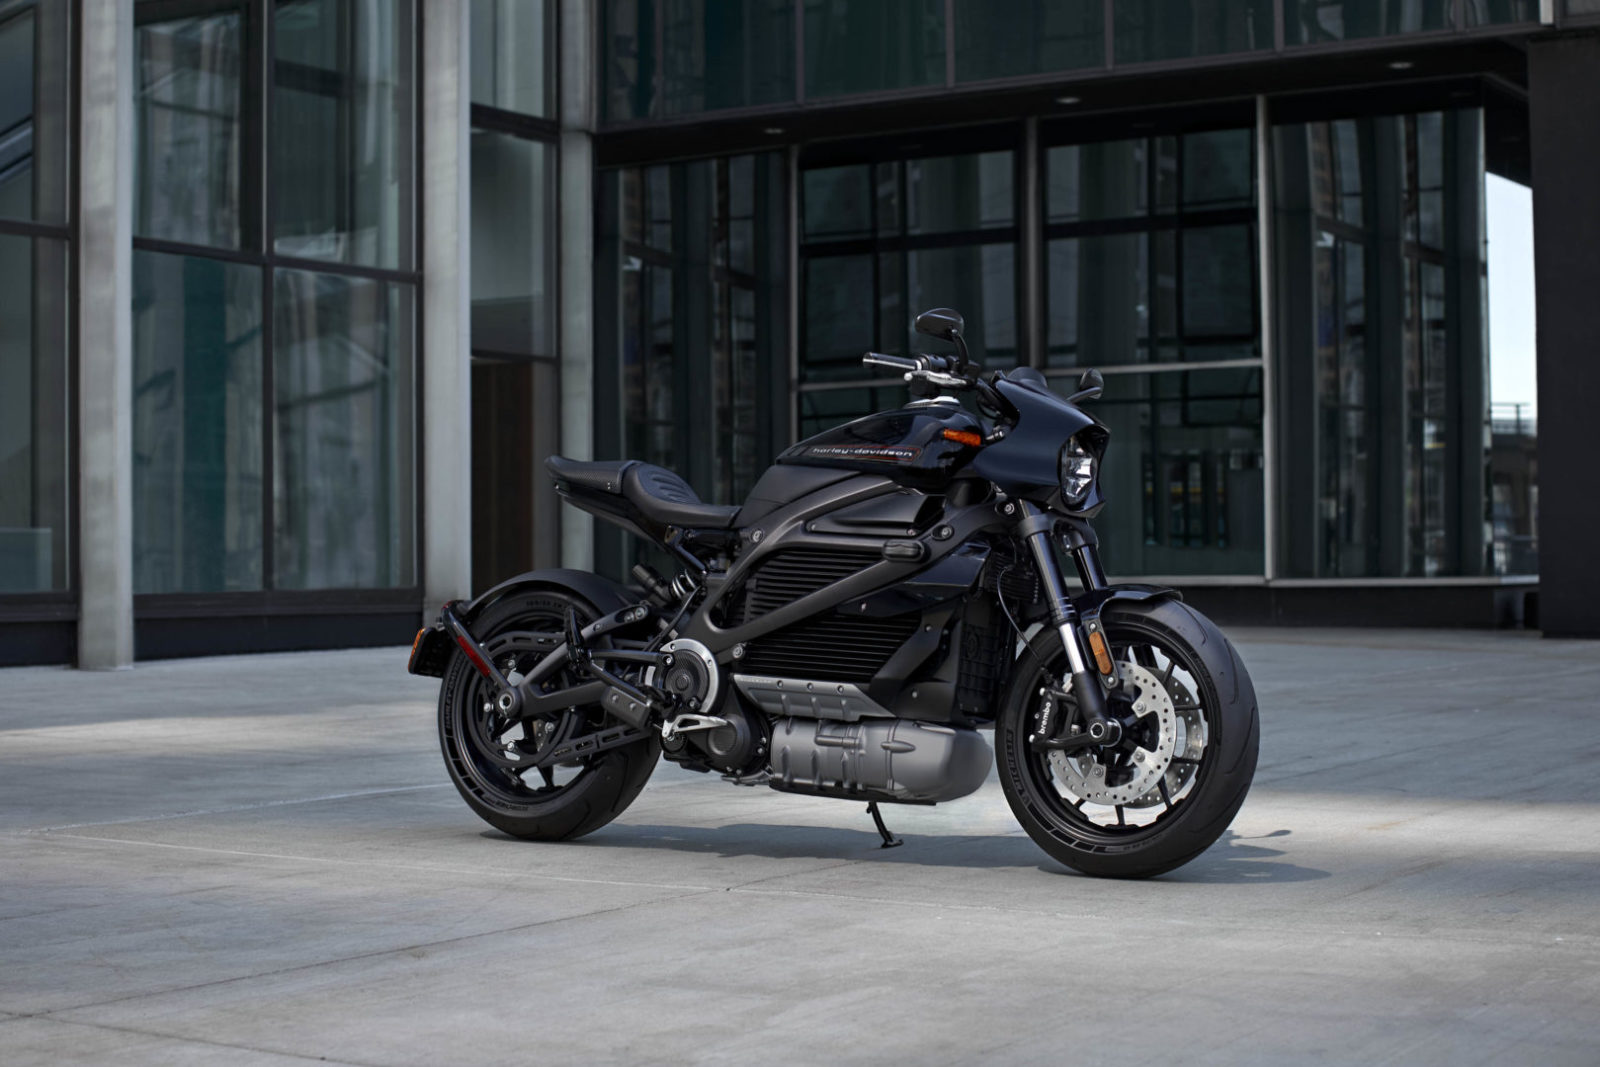 Harley-Davidson joins electric vehicle club by launching all electric motorcycle brand LiveWire